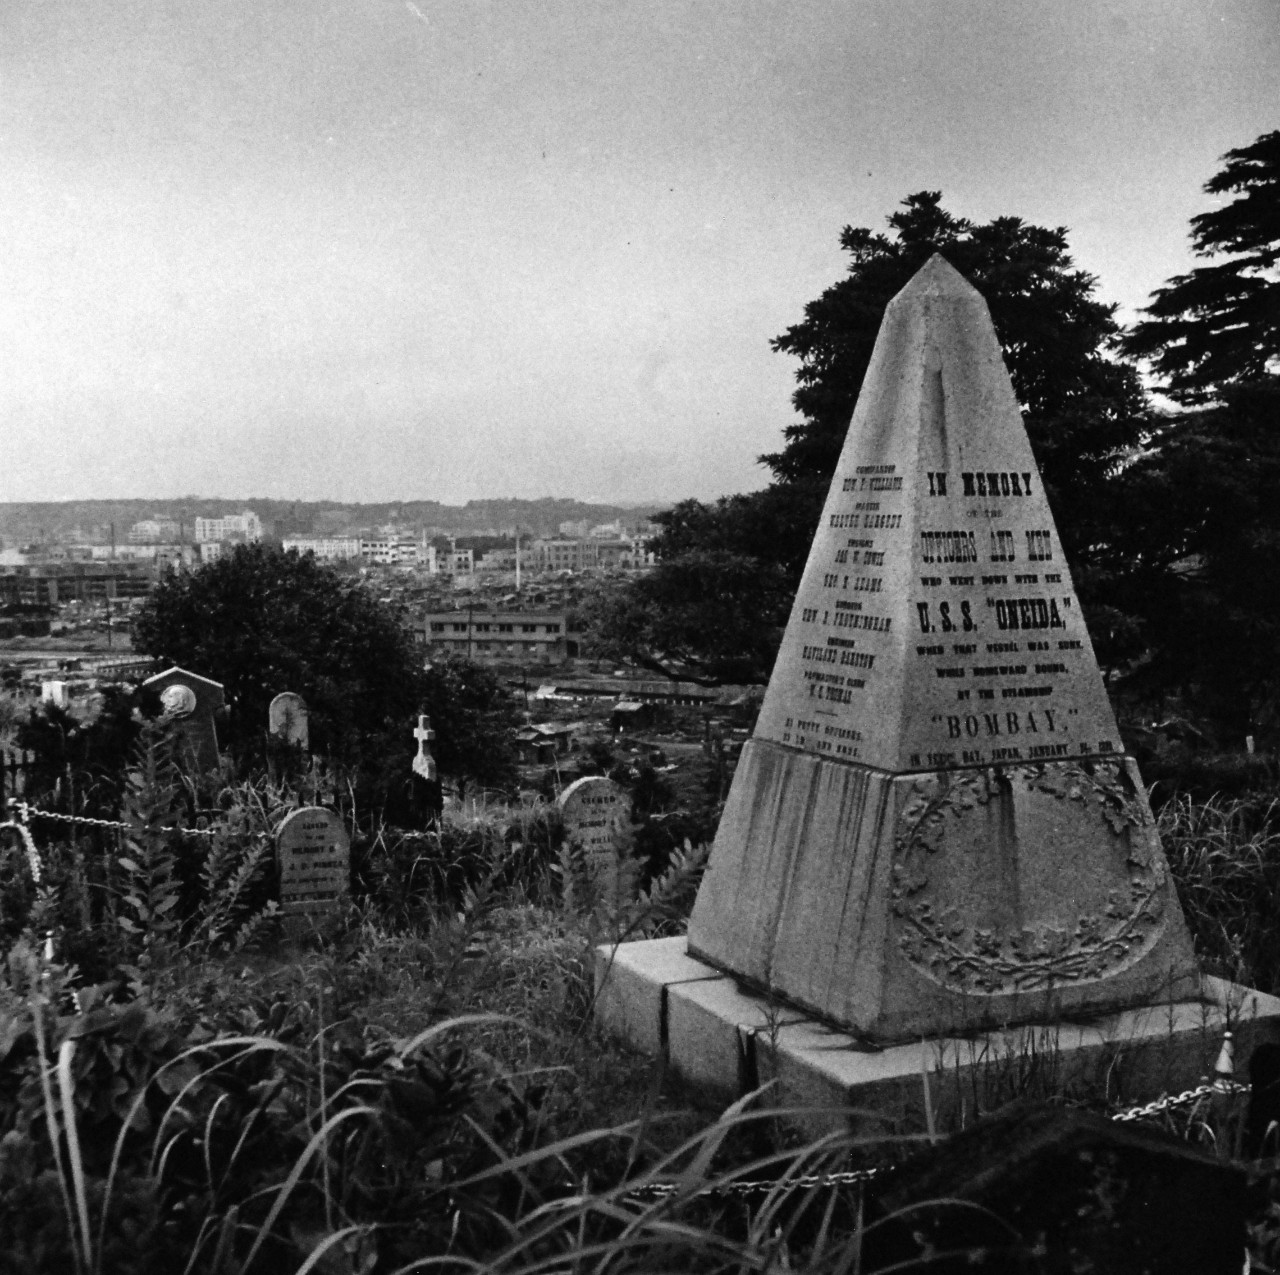 80-G-473744 (TR-15630):  Hiroshima, Japan, 1945.  Navy Photographer photographing devastation created by U.S. bombings at Yokohama, Japan, during World War.  Shown:  Monument to the deceased members of the crew of USS Oneida when she collided with a British steamer, Bombay on January 24, 1870.  125 men were lost. Photographed by Lieutenant Wayne Miller, September 1945.  Official U.S. Navy photograph, now in the collections of the National Archives.  (2015/11/10).